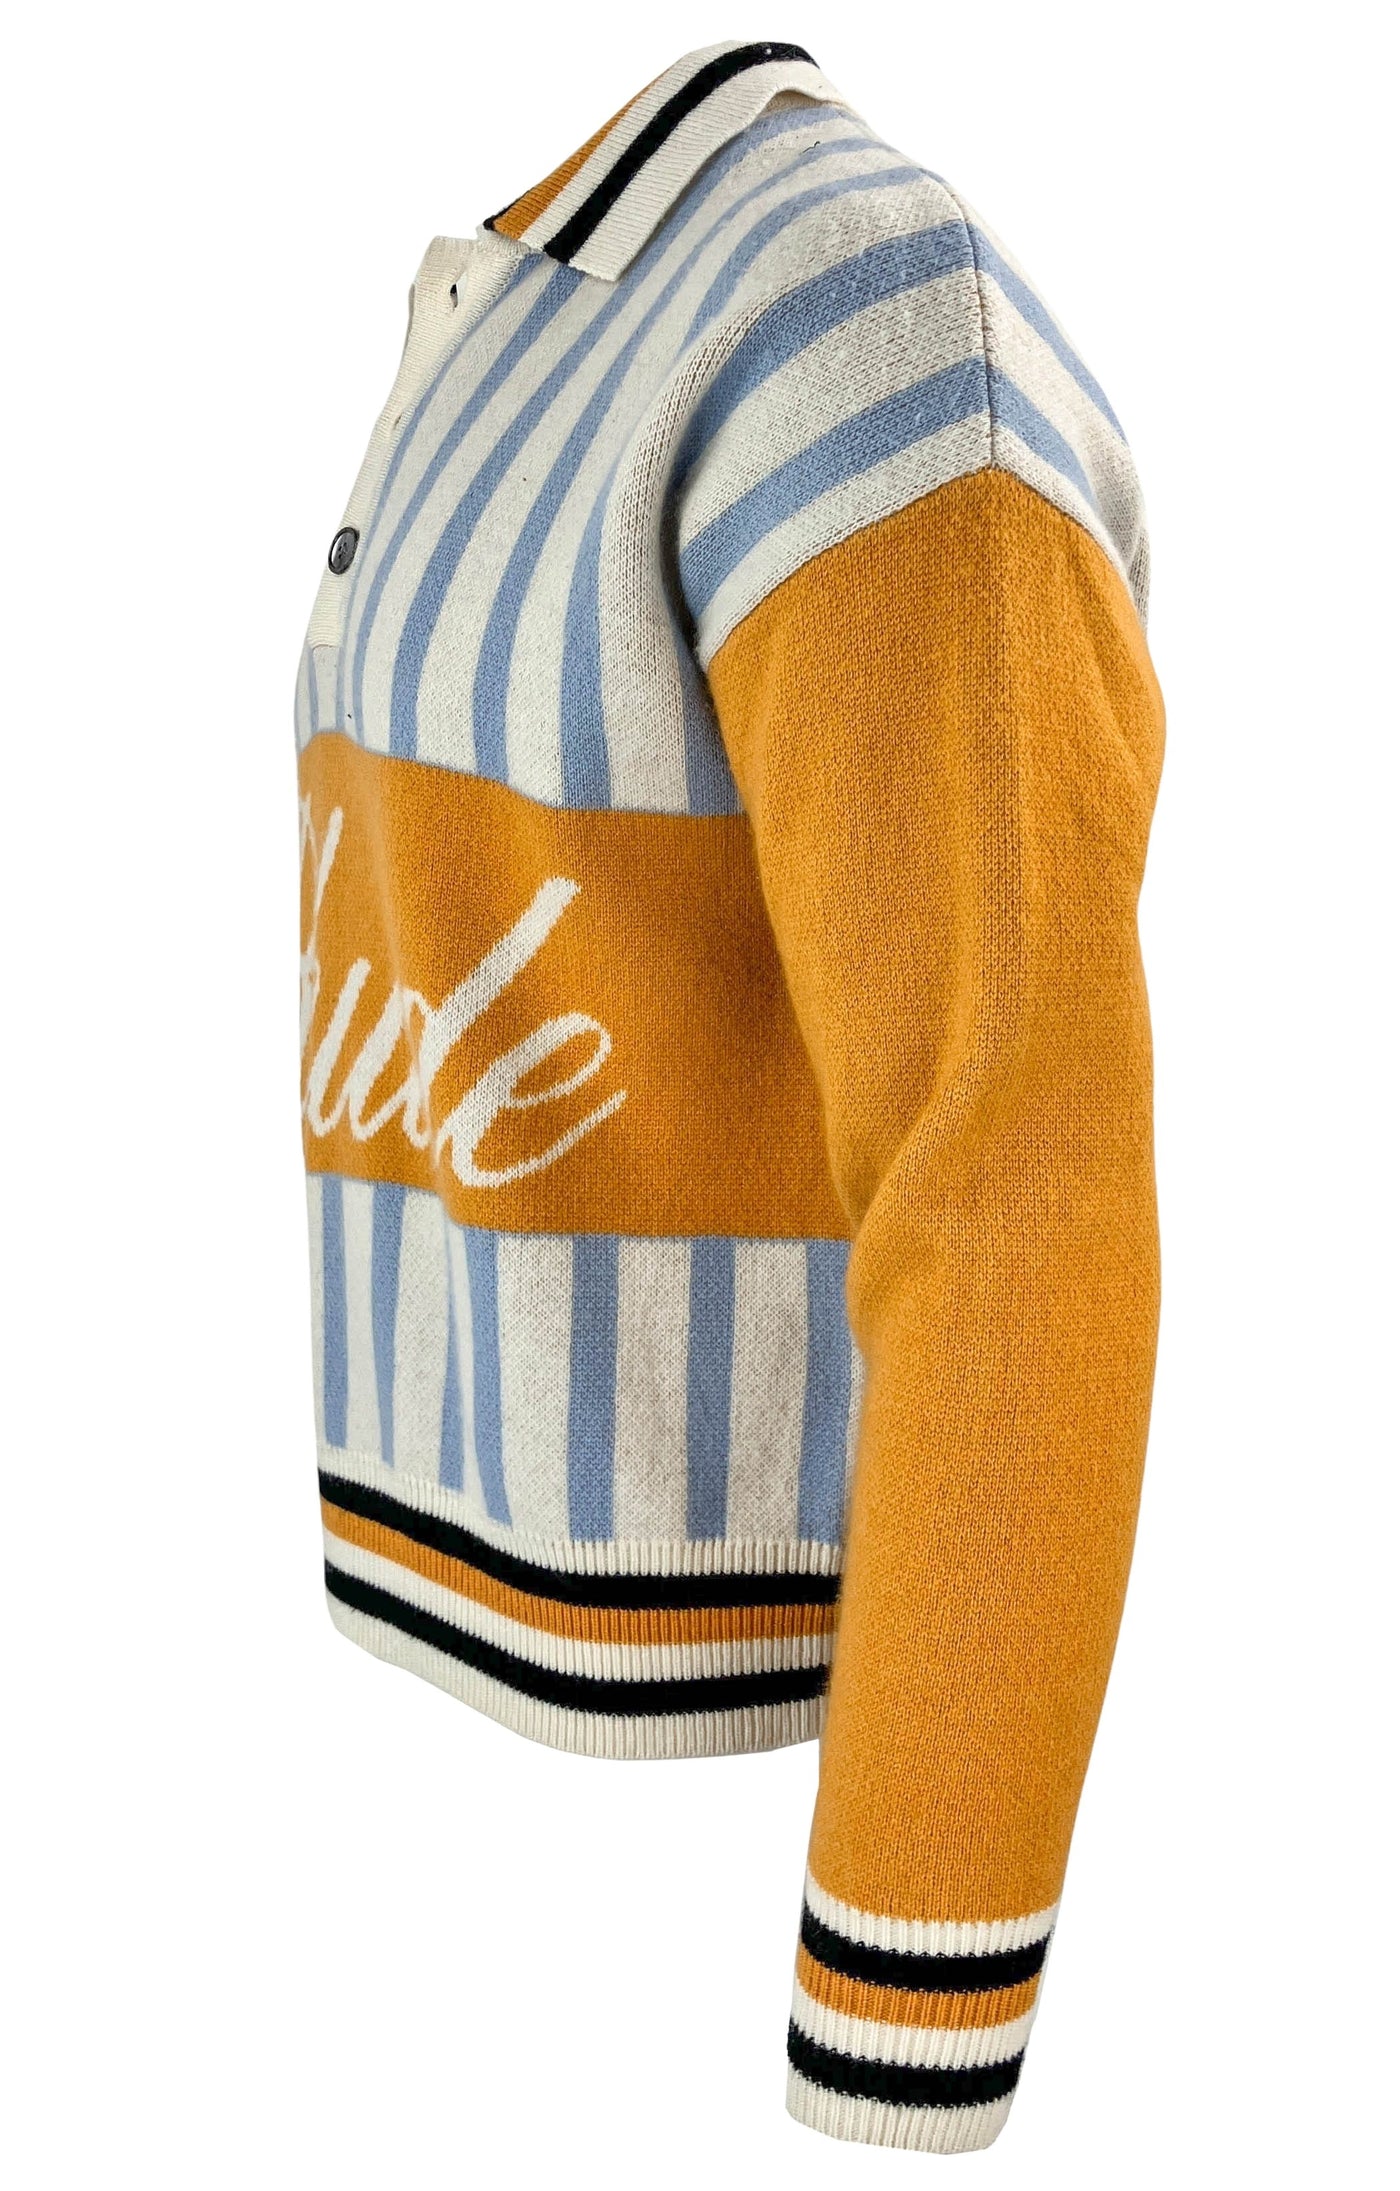 RHUDE Amber Knit Rugby Polo Shirt in Multi - Discounts on RHUDE at UAL